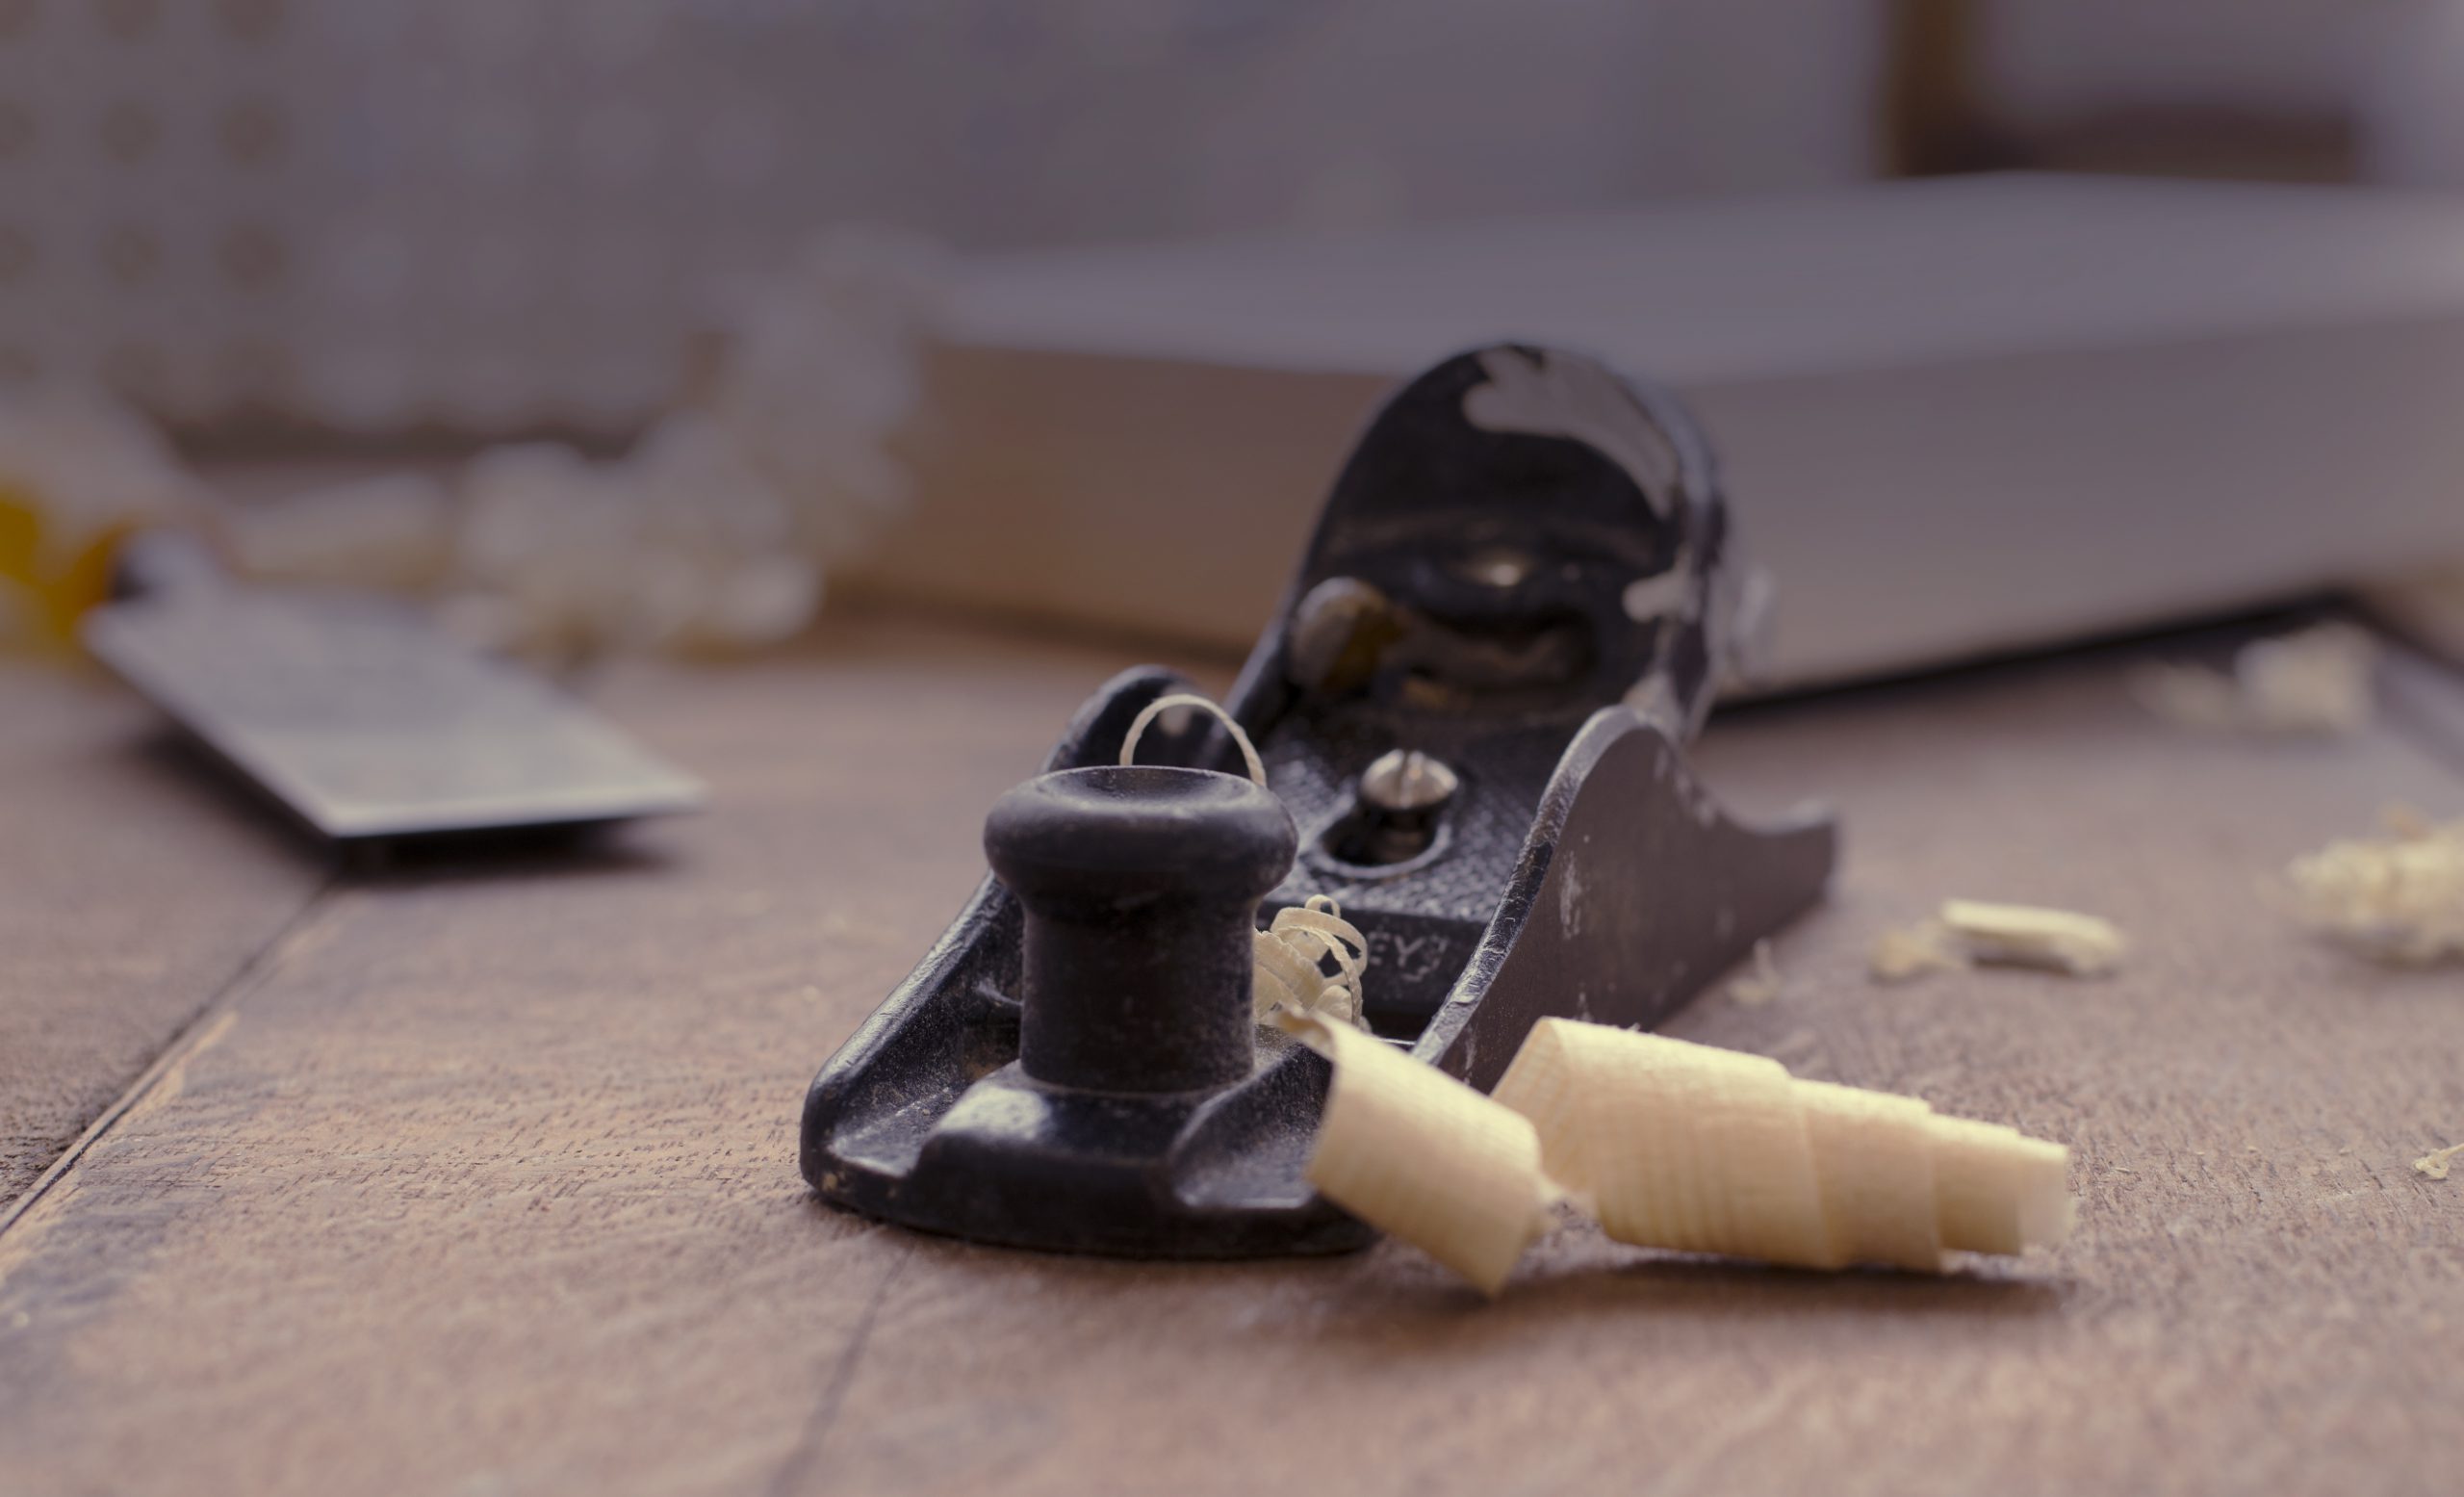 Photo of a block plane with wood shavings coming out of the plane's mouth